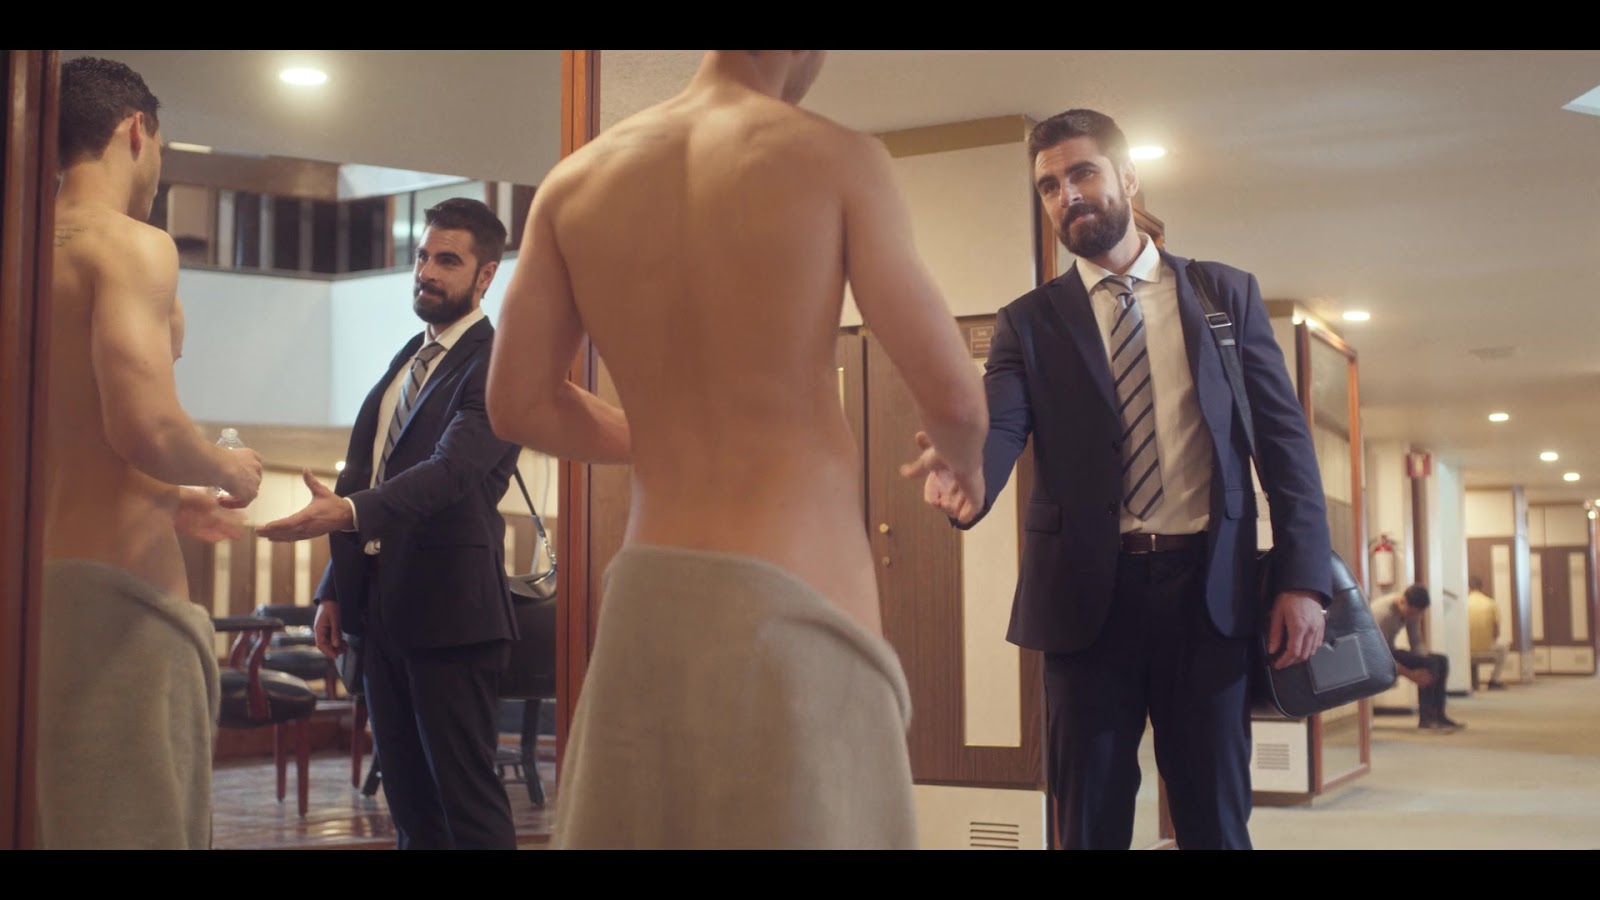 Older Gay Man In Suit Spanks And Jerks Naked Young Straight